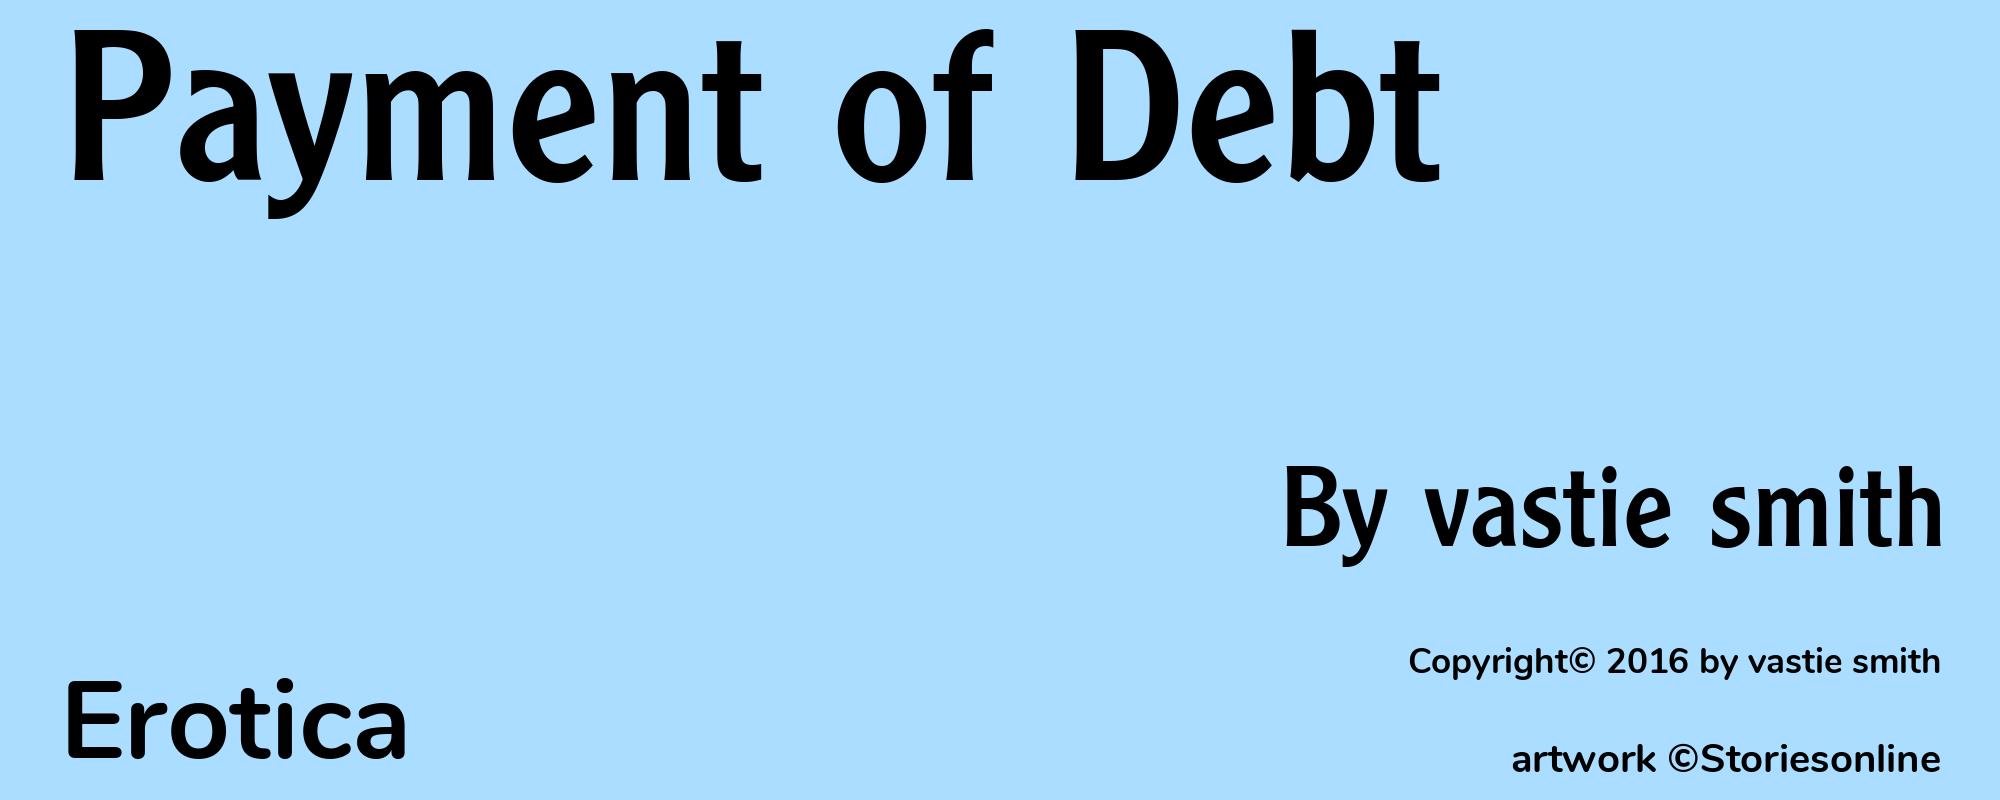 Payment of Debt - Cover